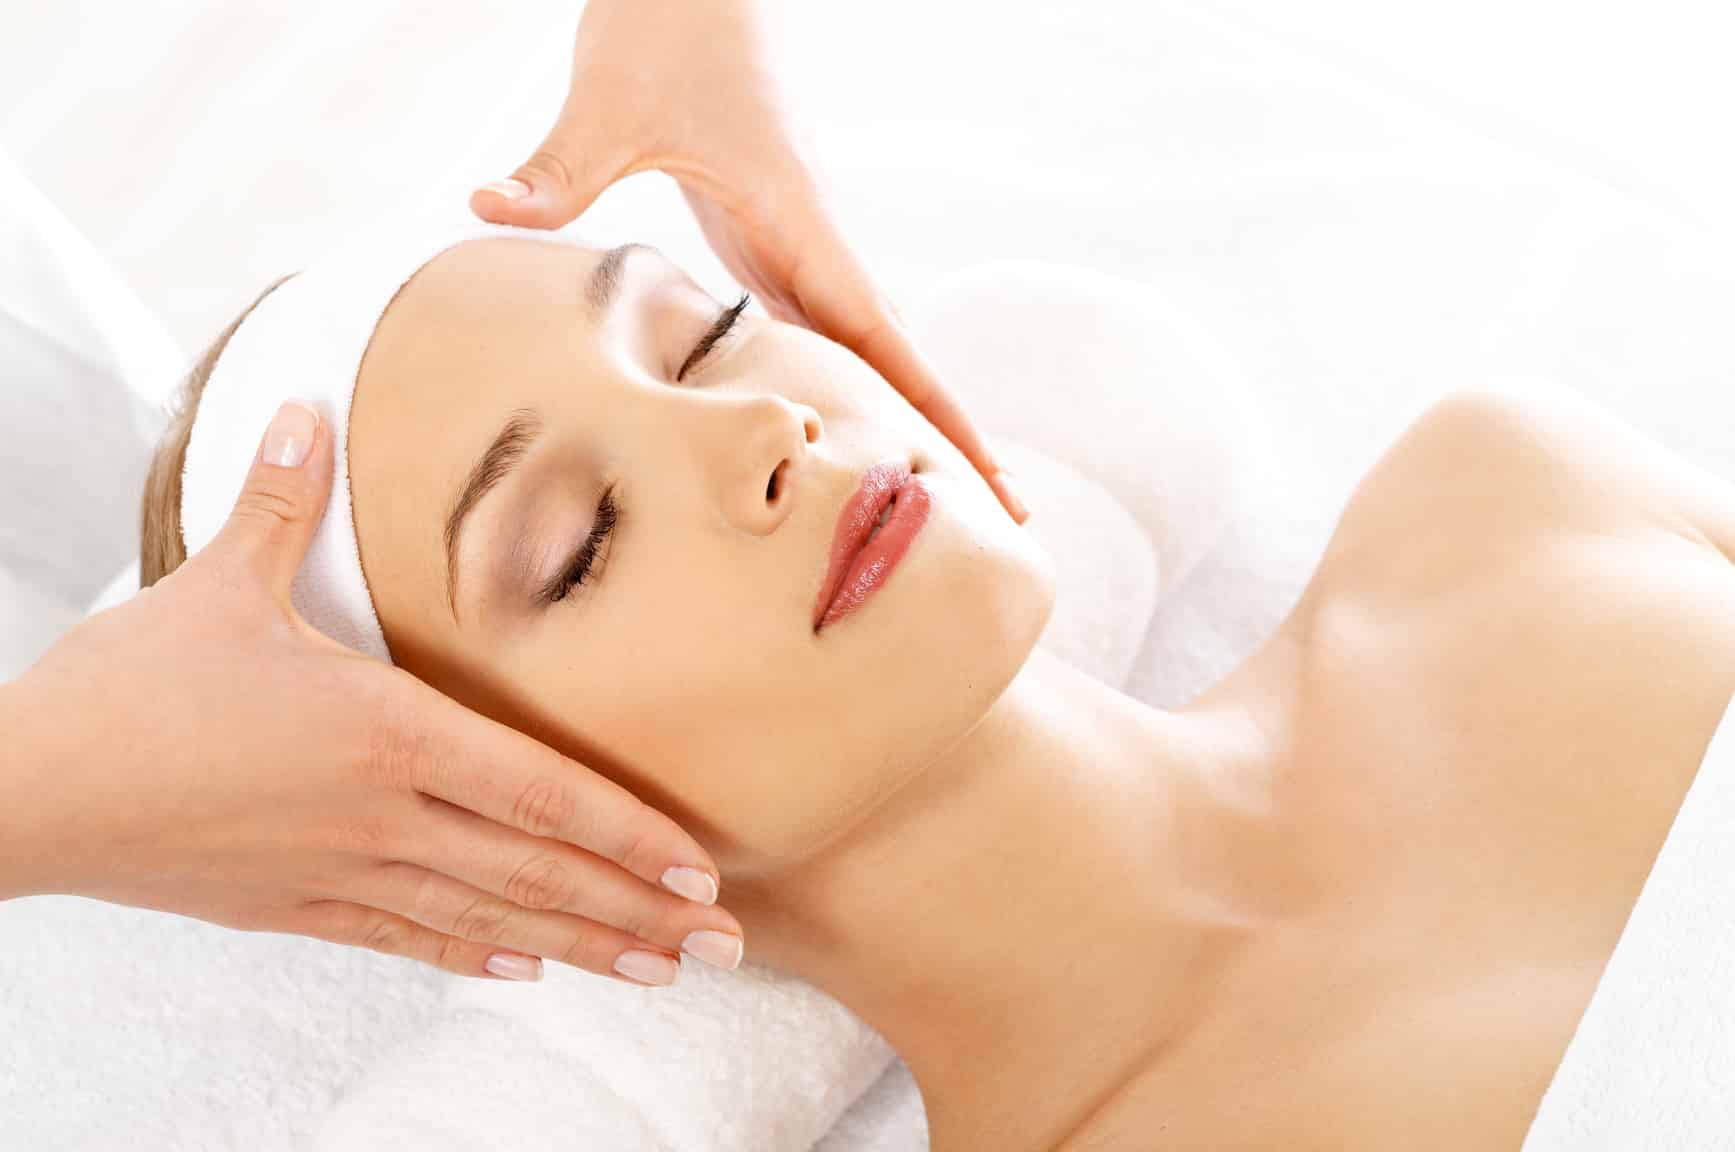 IPL Permanent Hair Reduction & Photo Facials - Miss Mary Boutique Spa